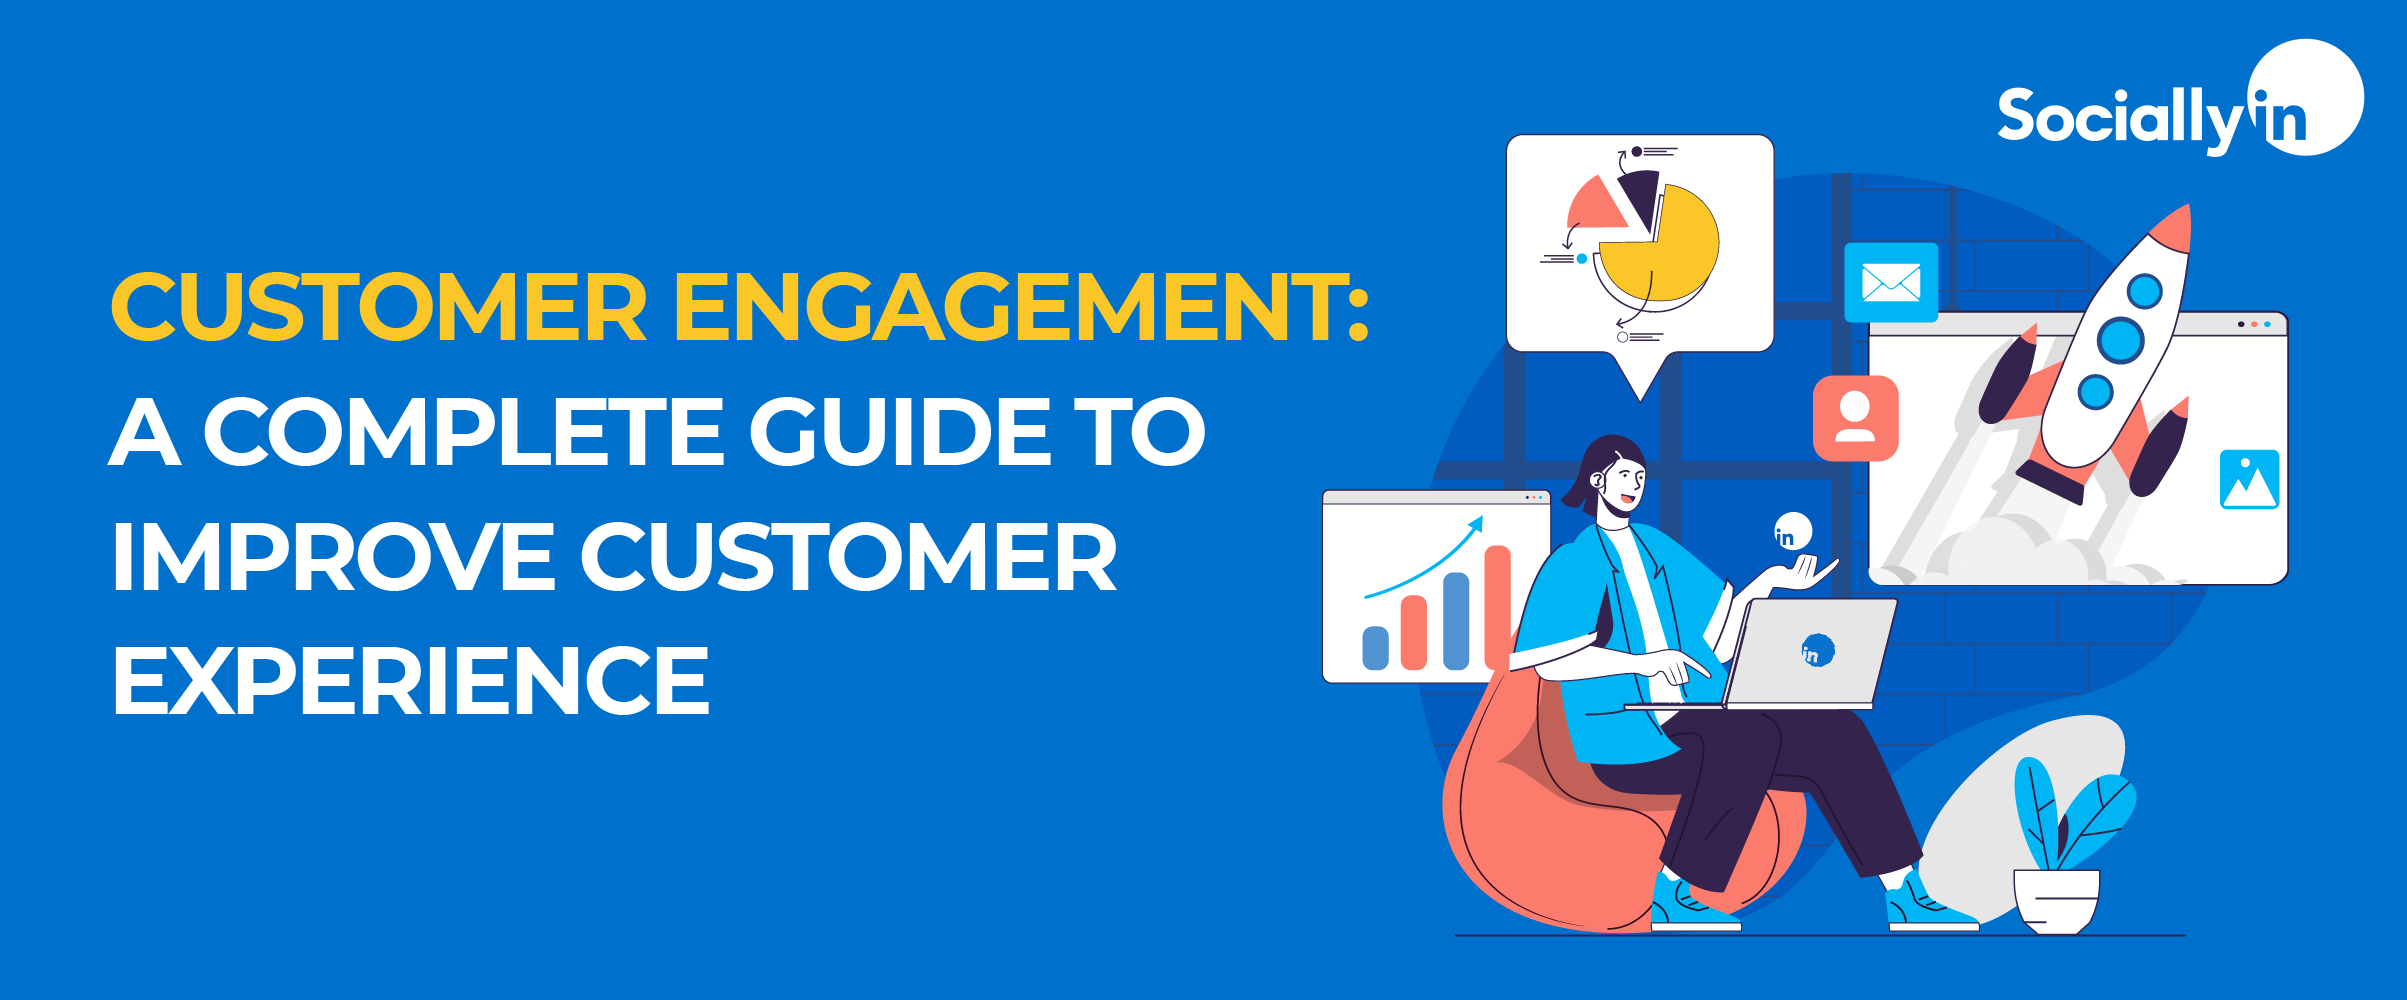 customer-engagement-guide